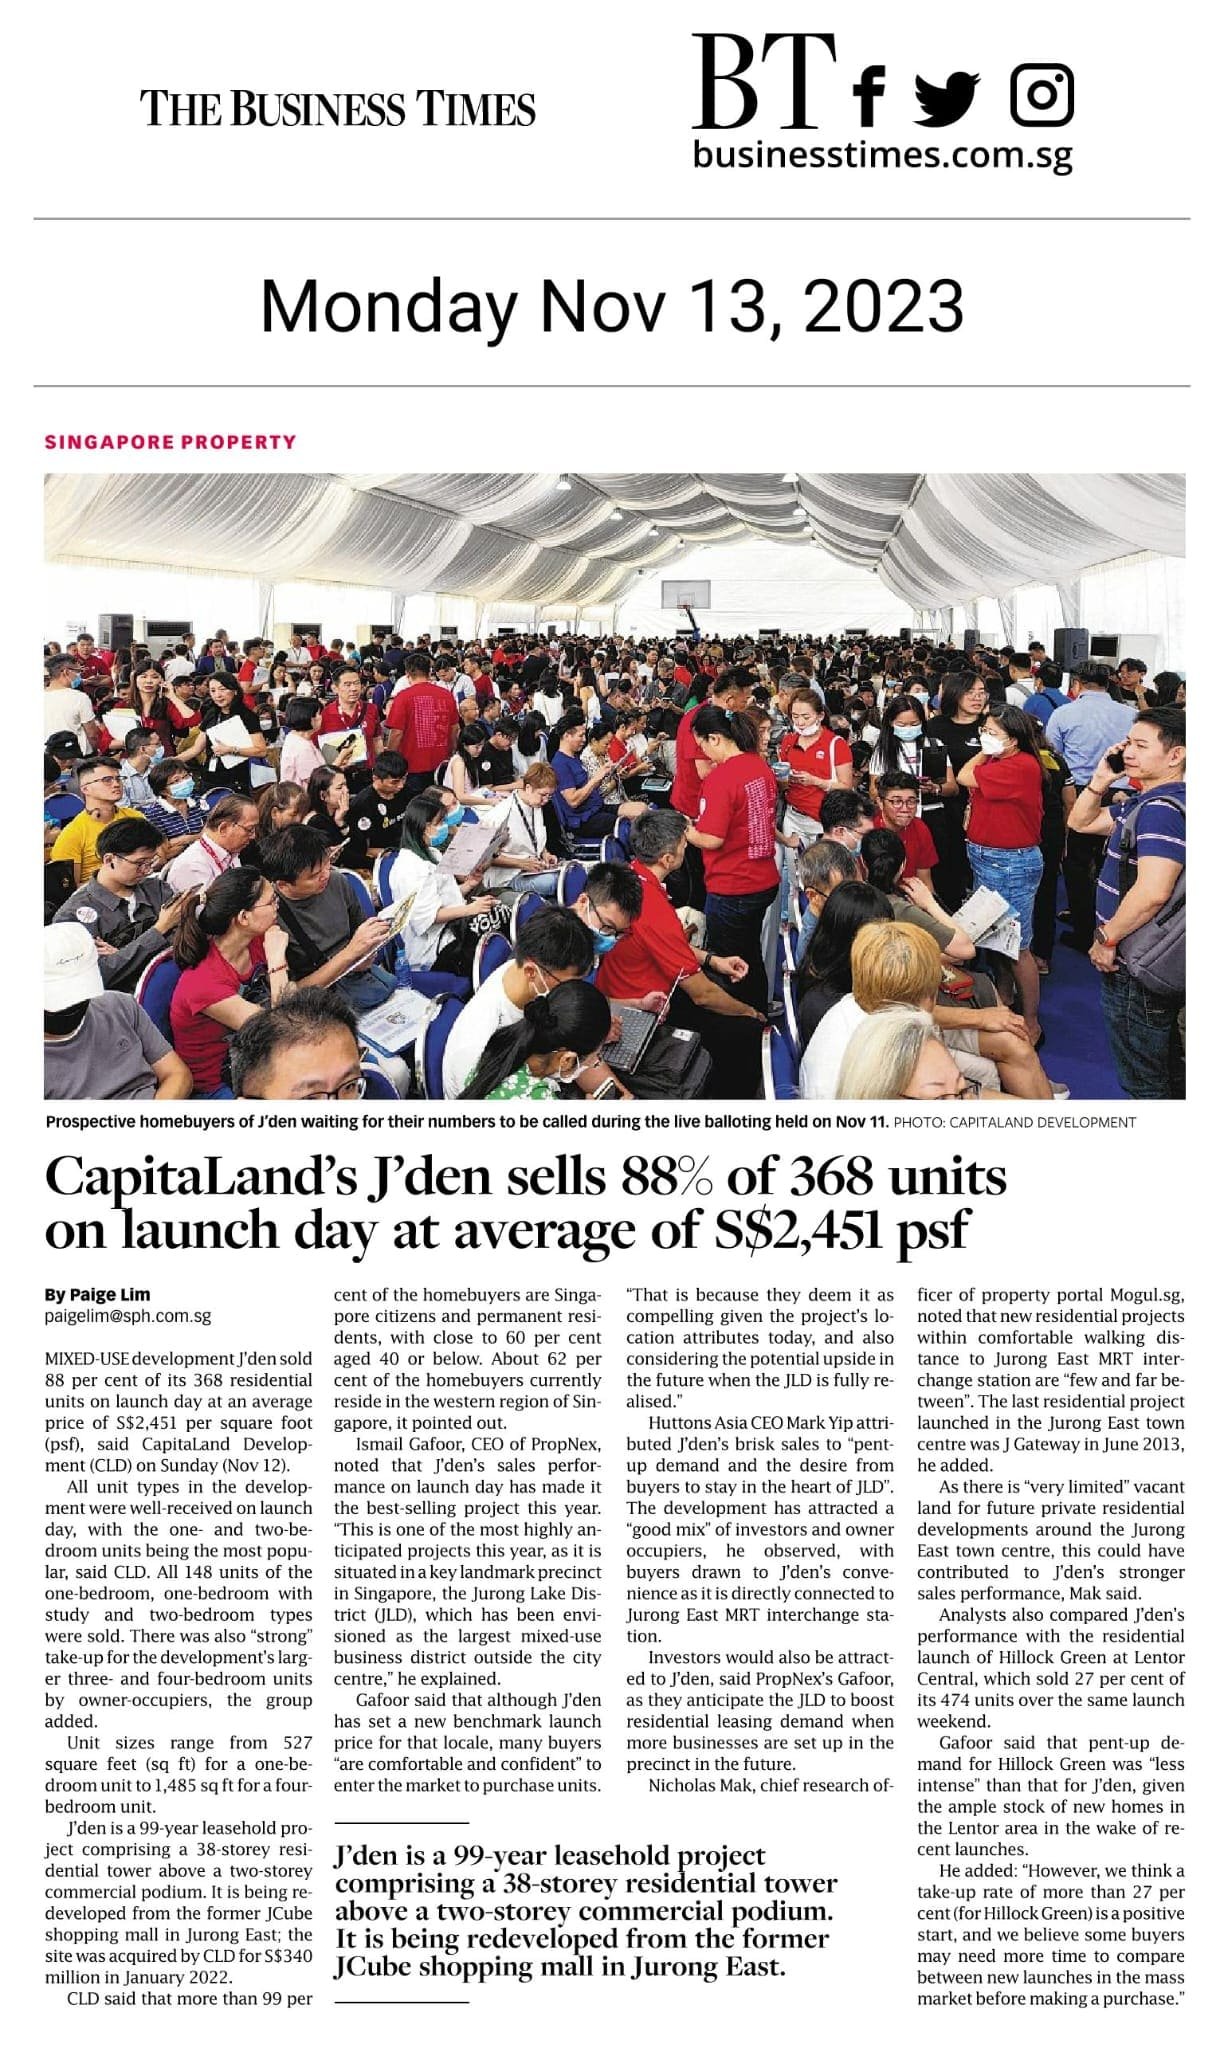 capitaland-jden-sells-88-of-368-units-on-launch-day-at-average-2451psf